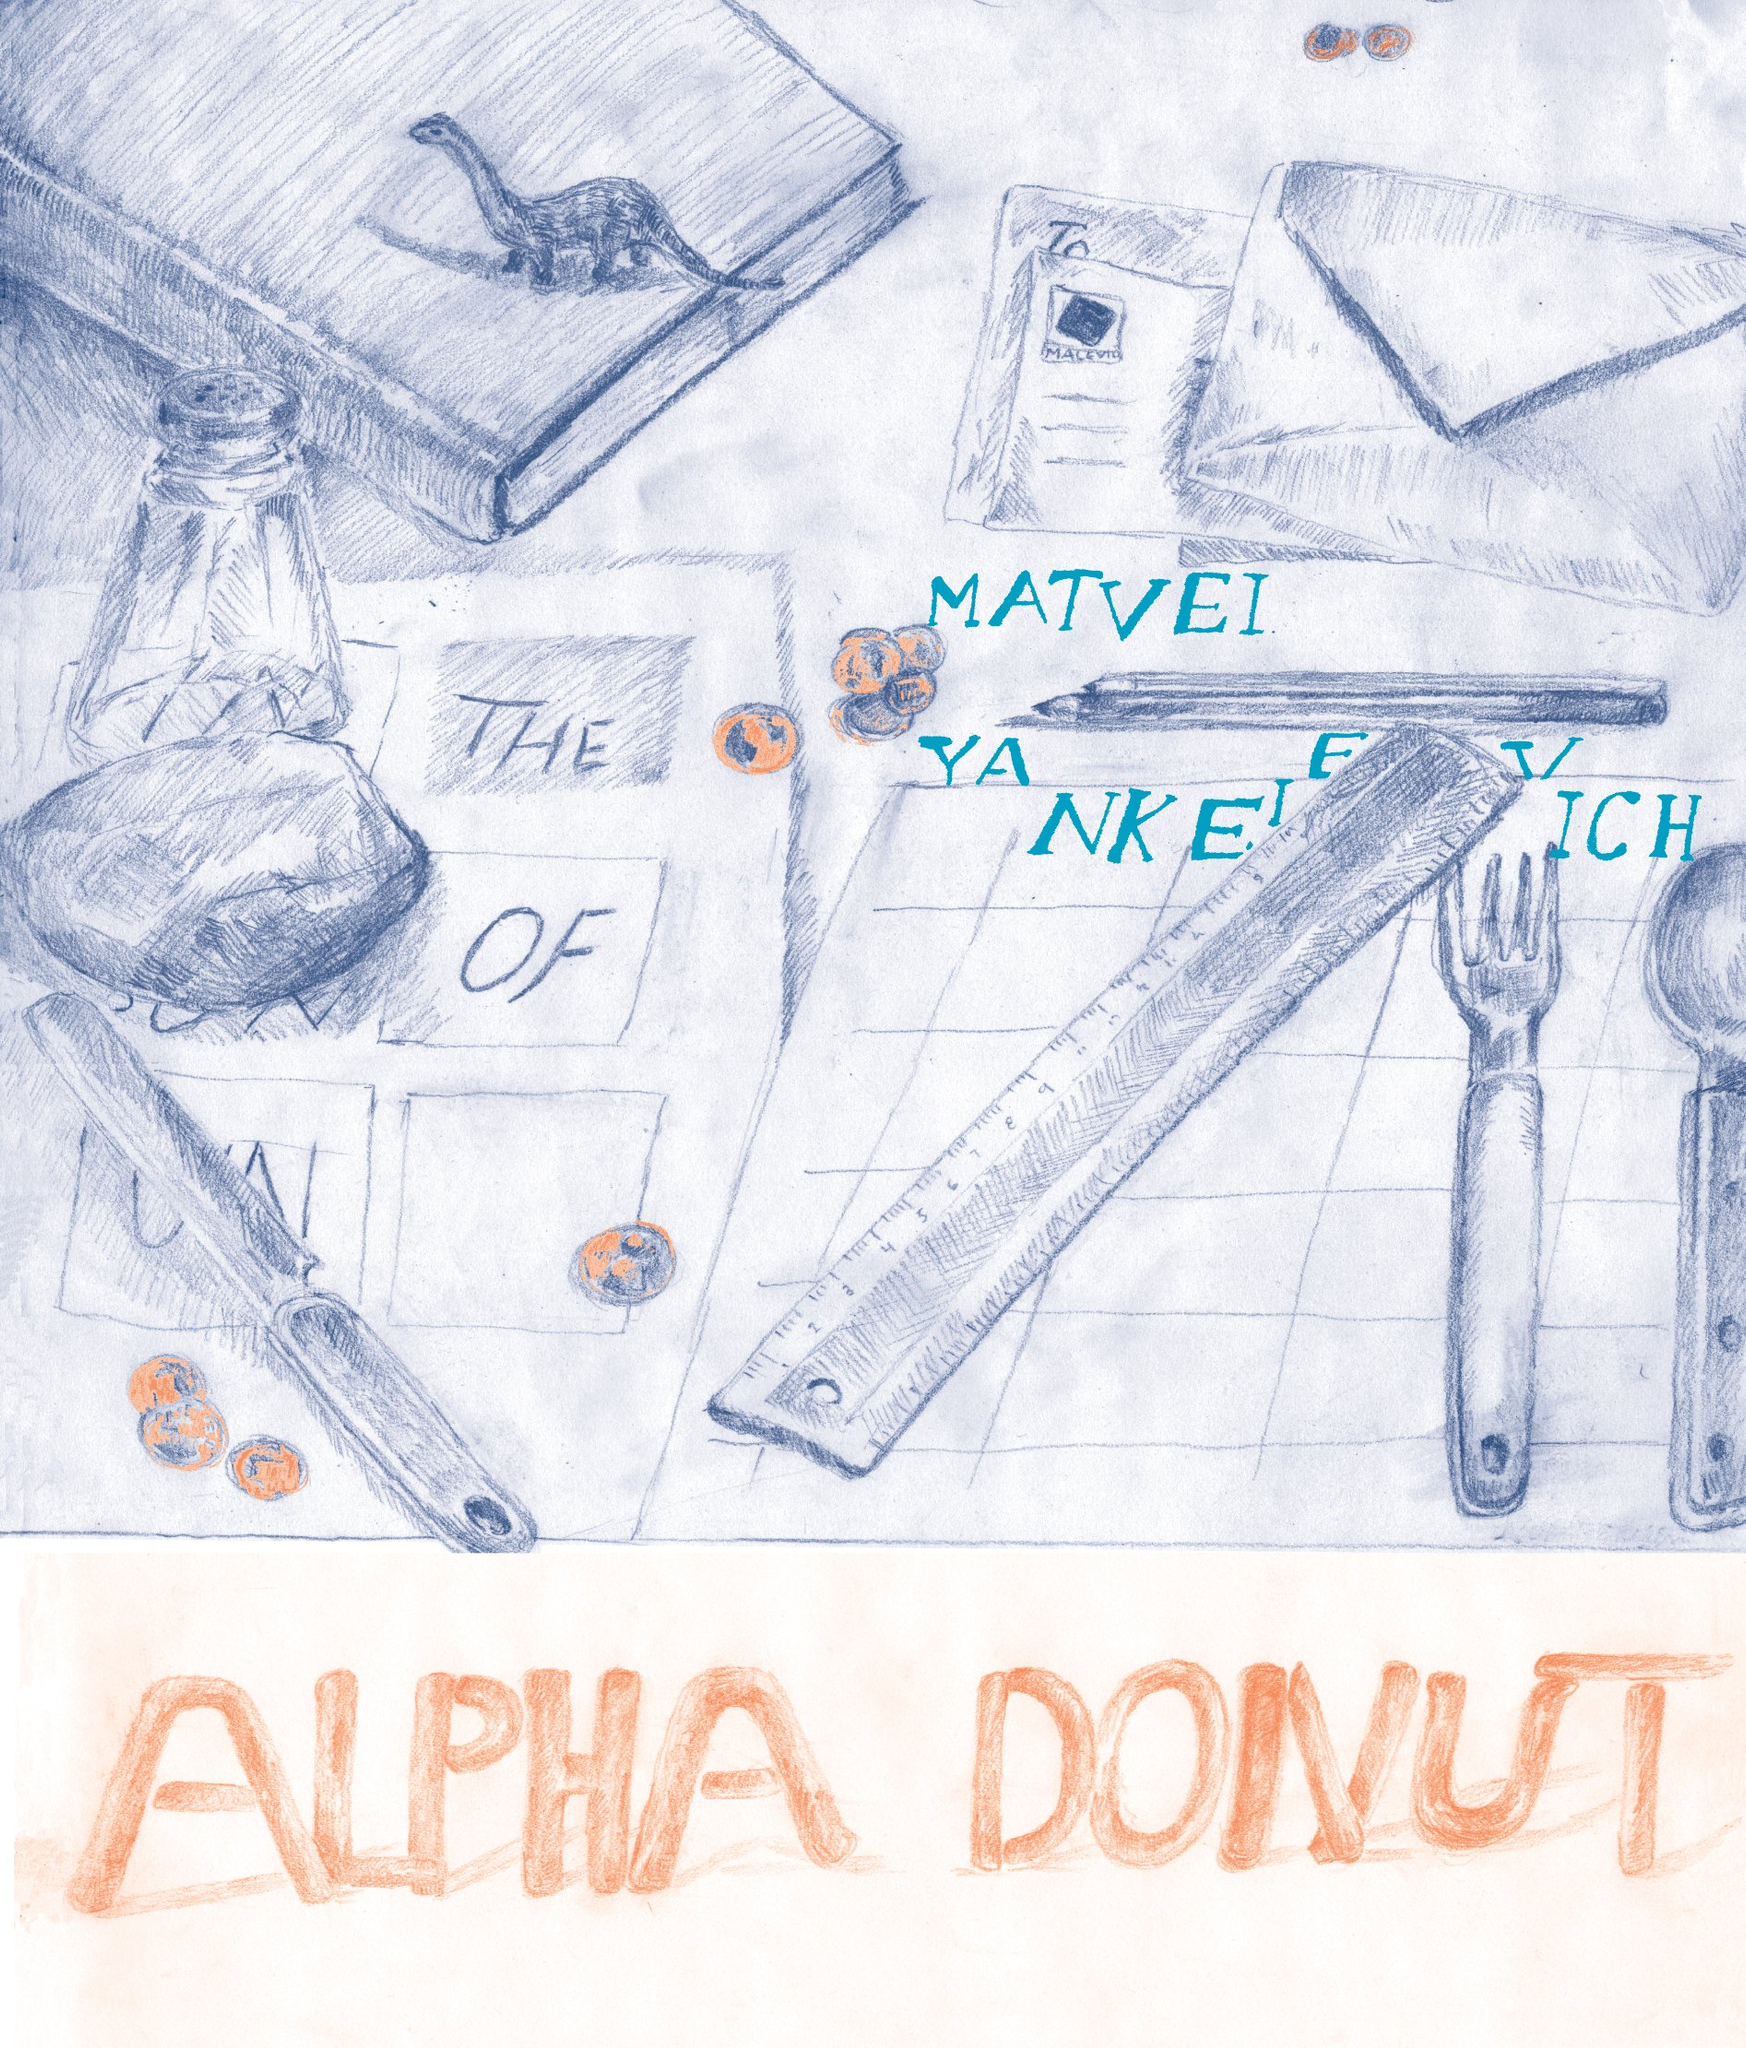 Alpha Donut: The Selected Shorter Works of Matvei Yankelevich